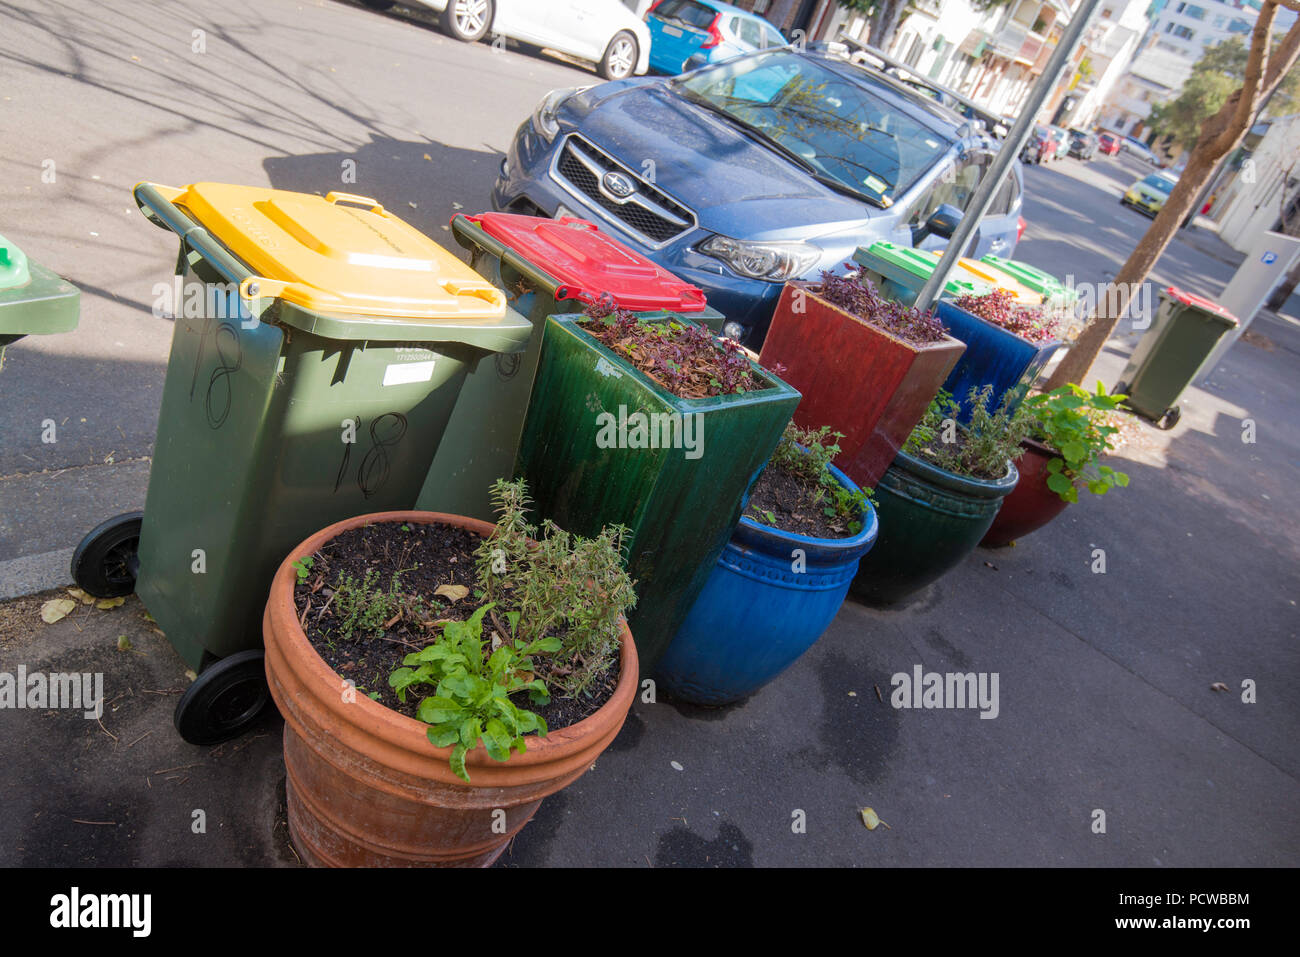 Garden pots and small plants and shrubs provide color and greenery on a street in the densely populated suburb of Surry Hills in inner Sydney Stock Photo